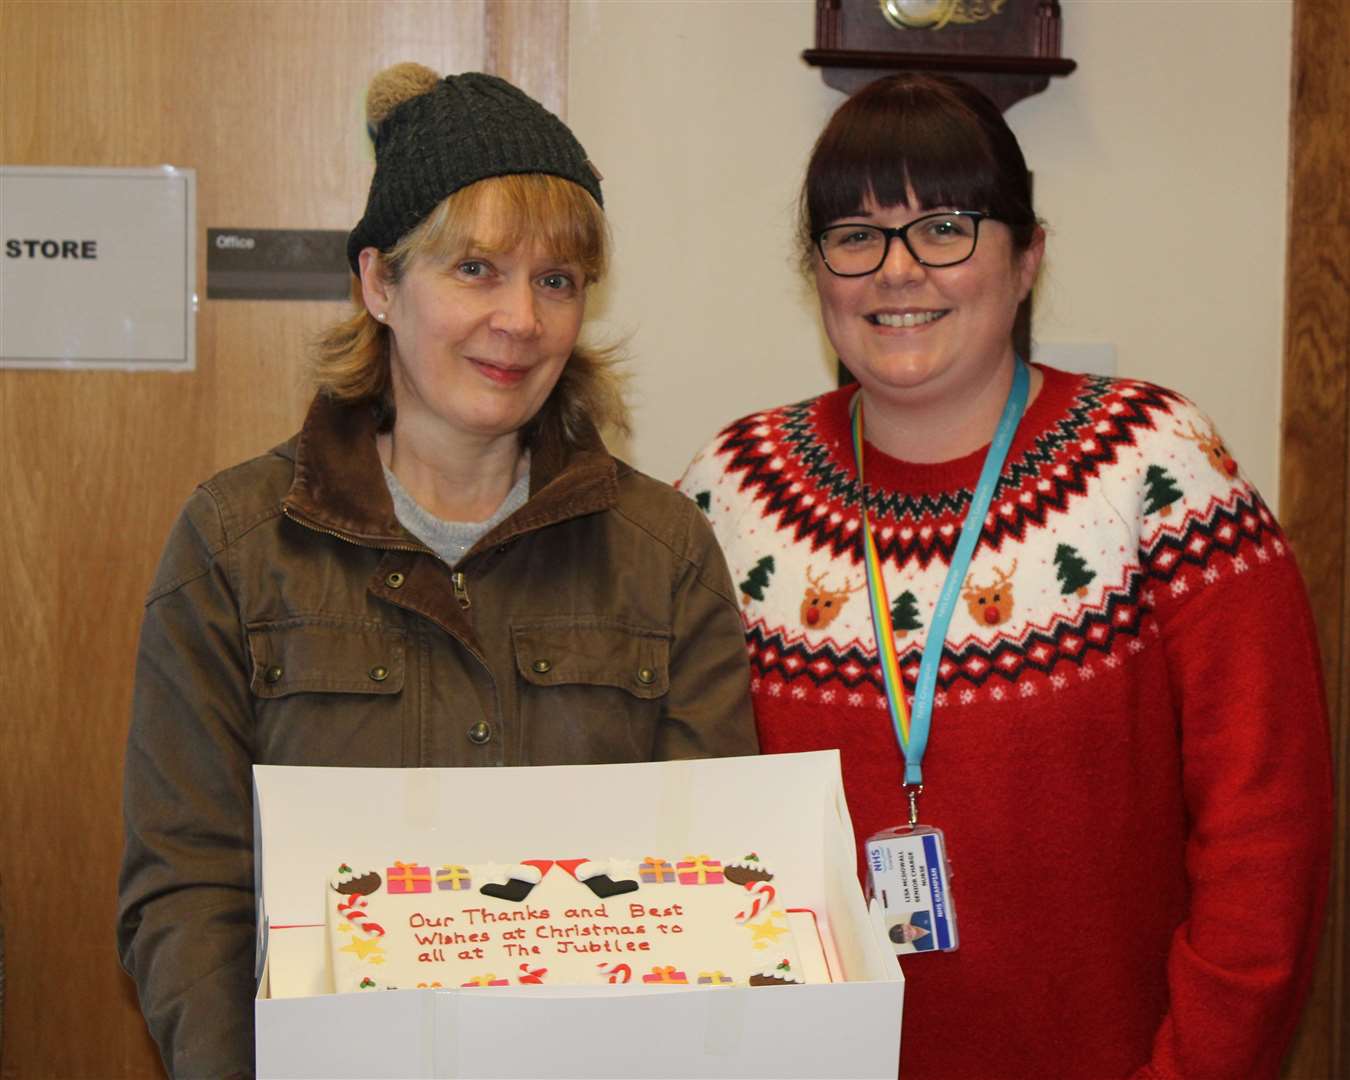 Cake baker Evelyn Muir (left) with Lisa McDowall, in charge of the Rothieden and Minor Injuries Unit.